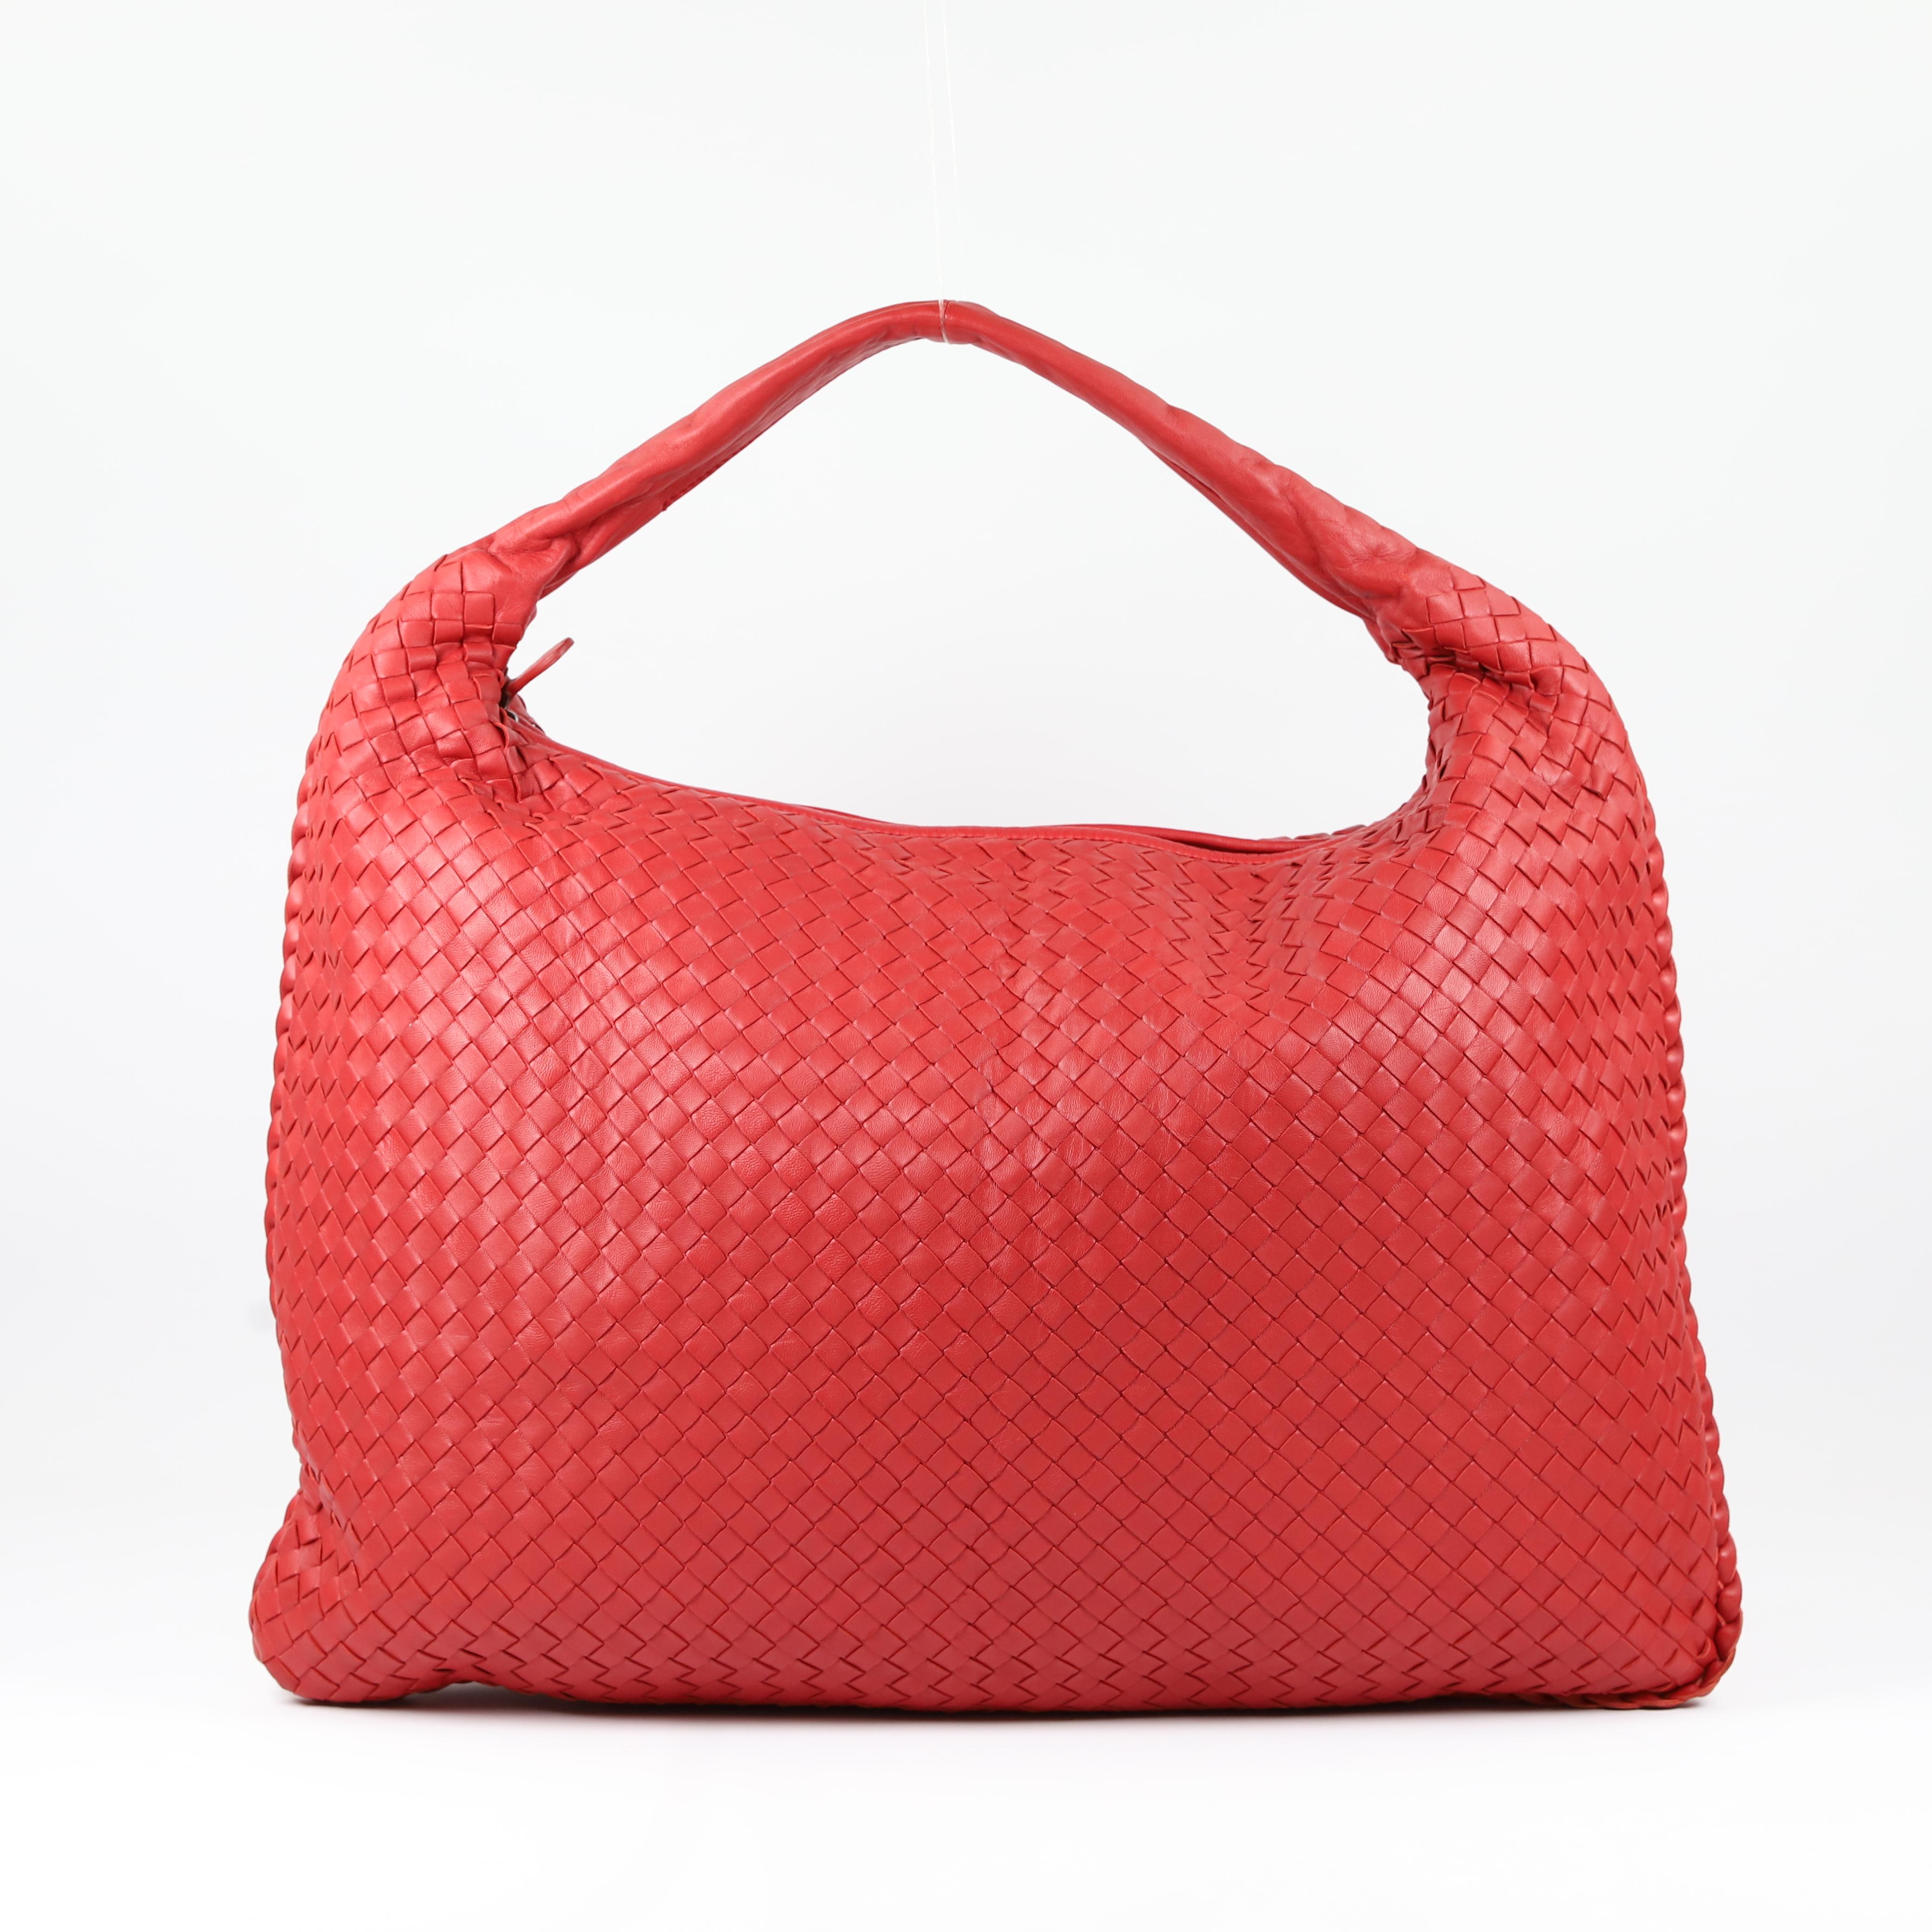 This classic Bottega Veneta Intrecciato Veneta Hobo Bag is one of our favorites. Its chic, slouchy look features Bottega's signature Intrecciato woven leather in a lovely red color. You can always count on Bottega Veneta to give us modern timeless